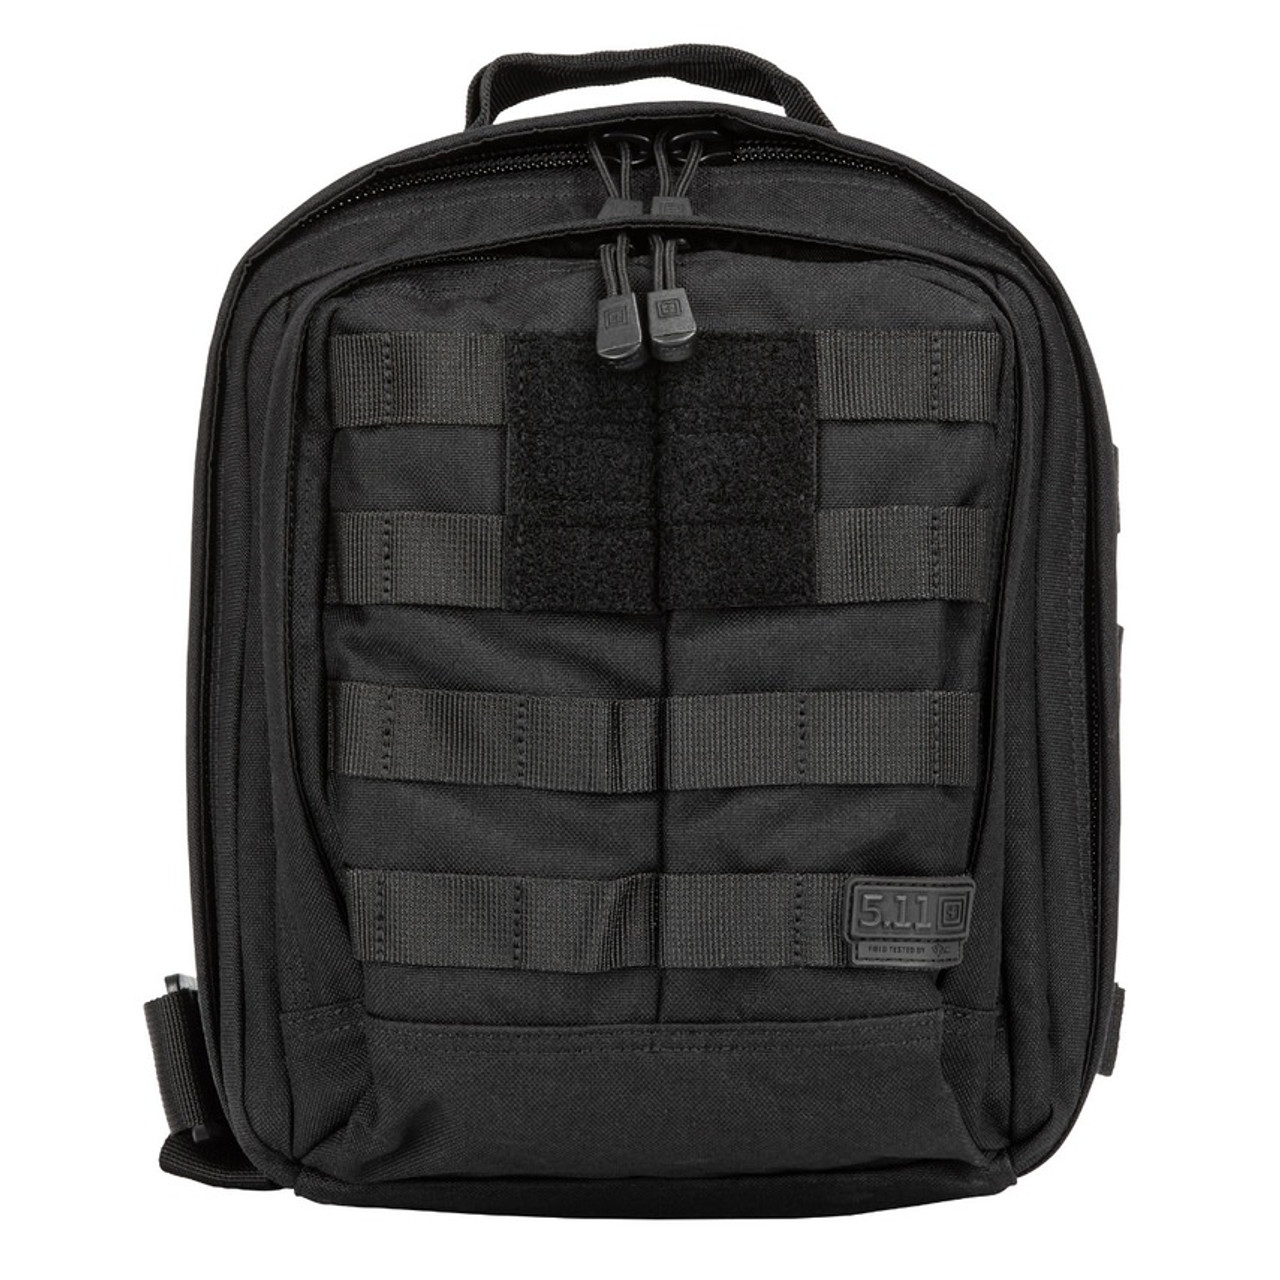 Catalog of 5.11 Tactical® products in Ukraine prices 2023 - buy in